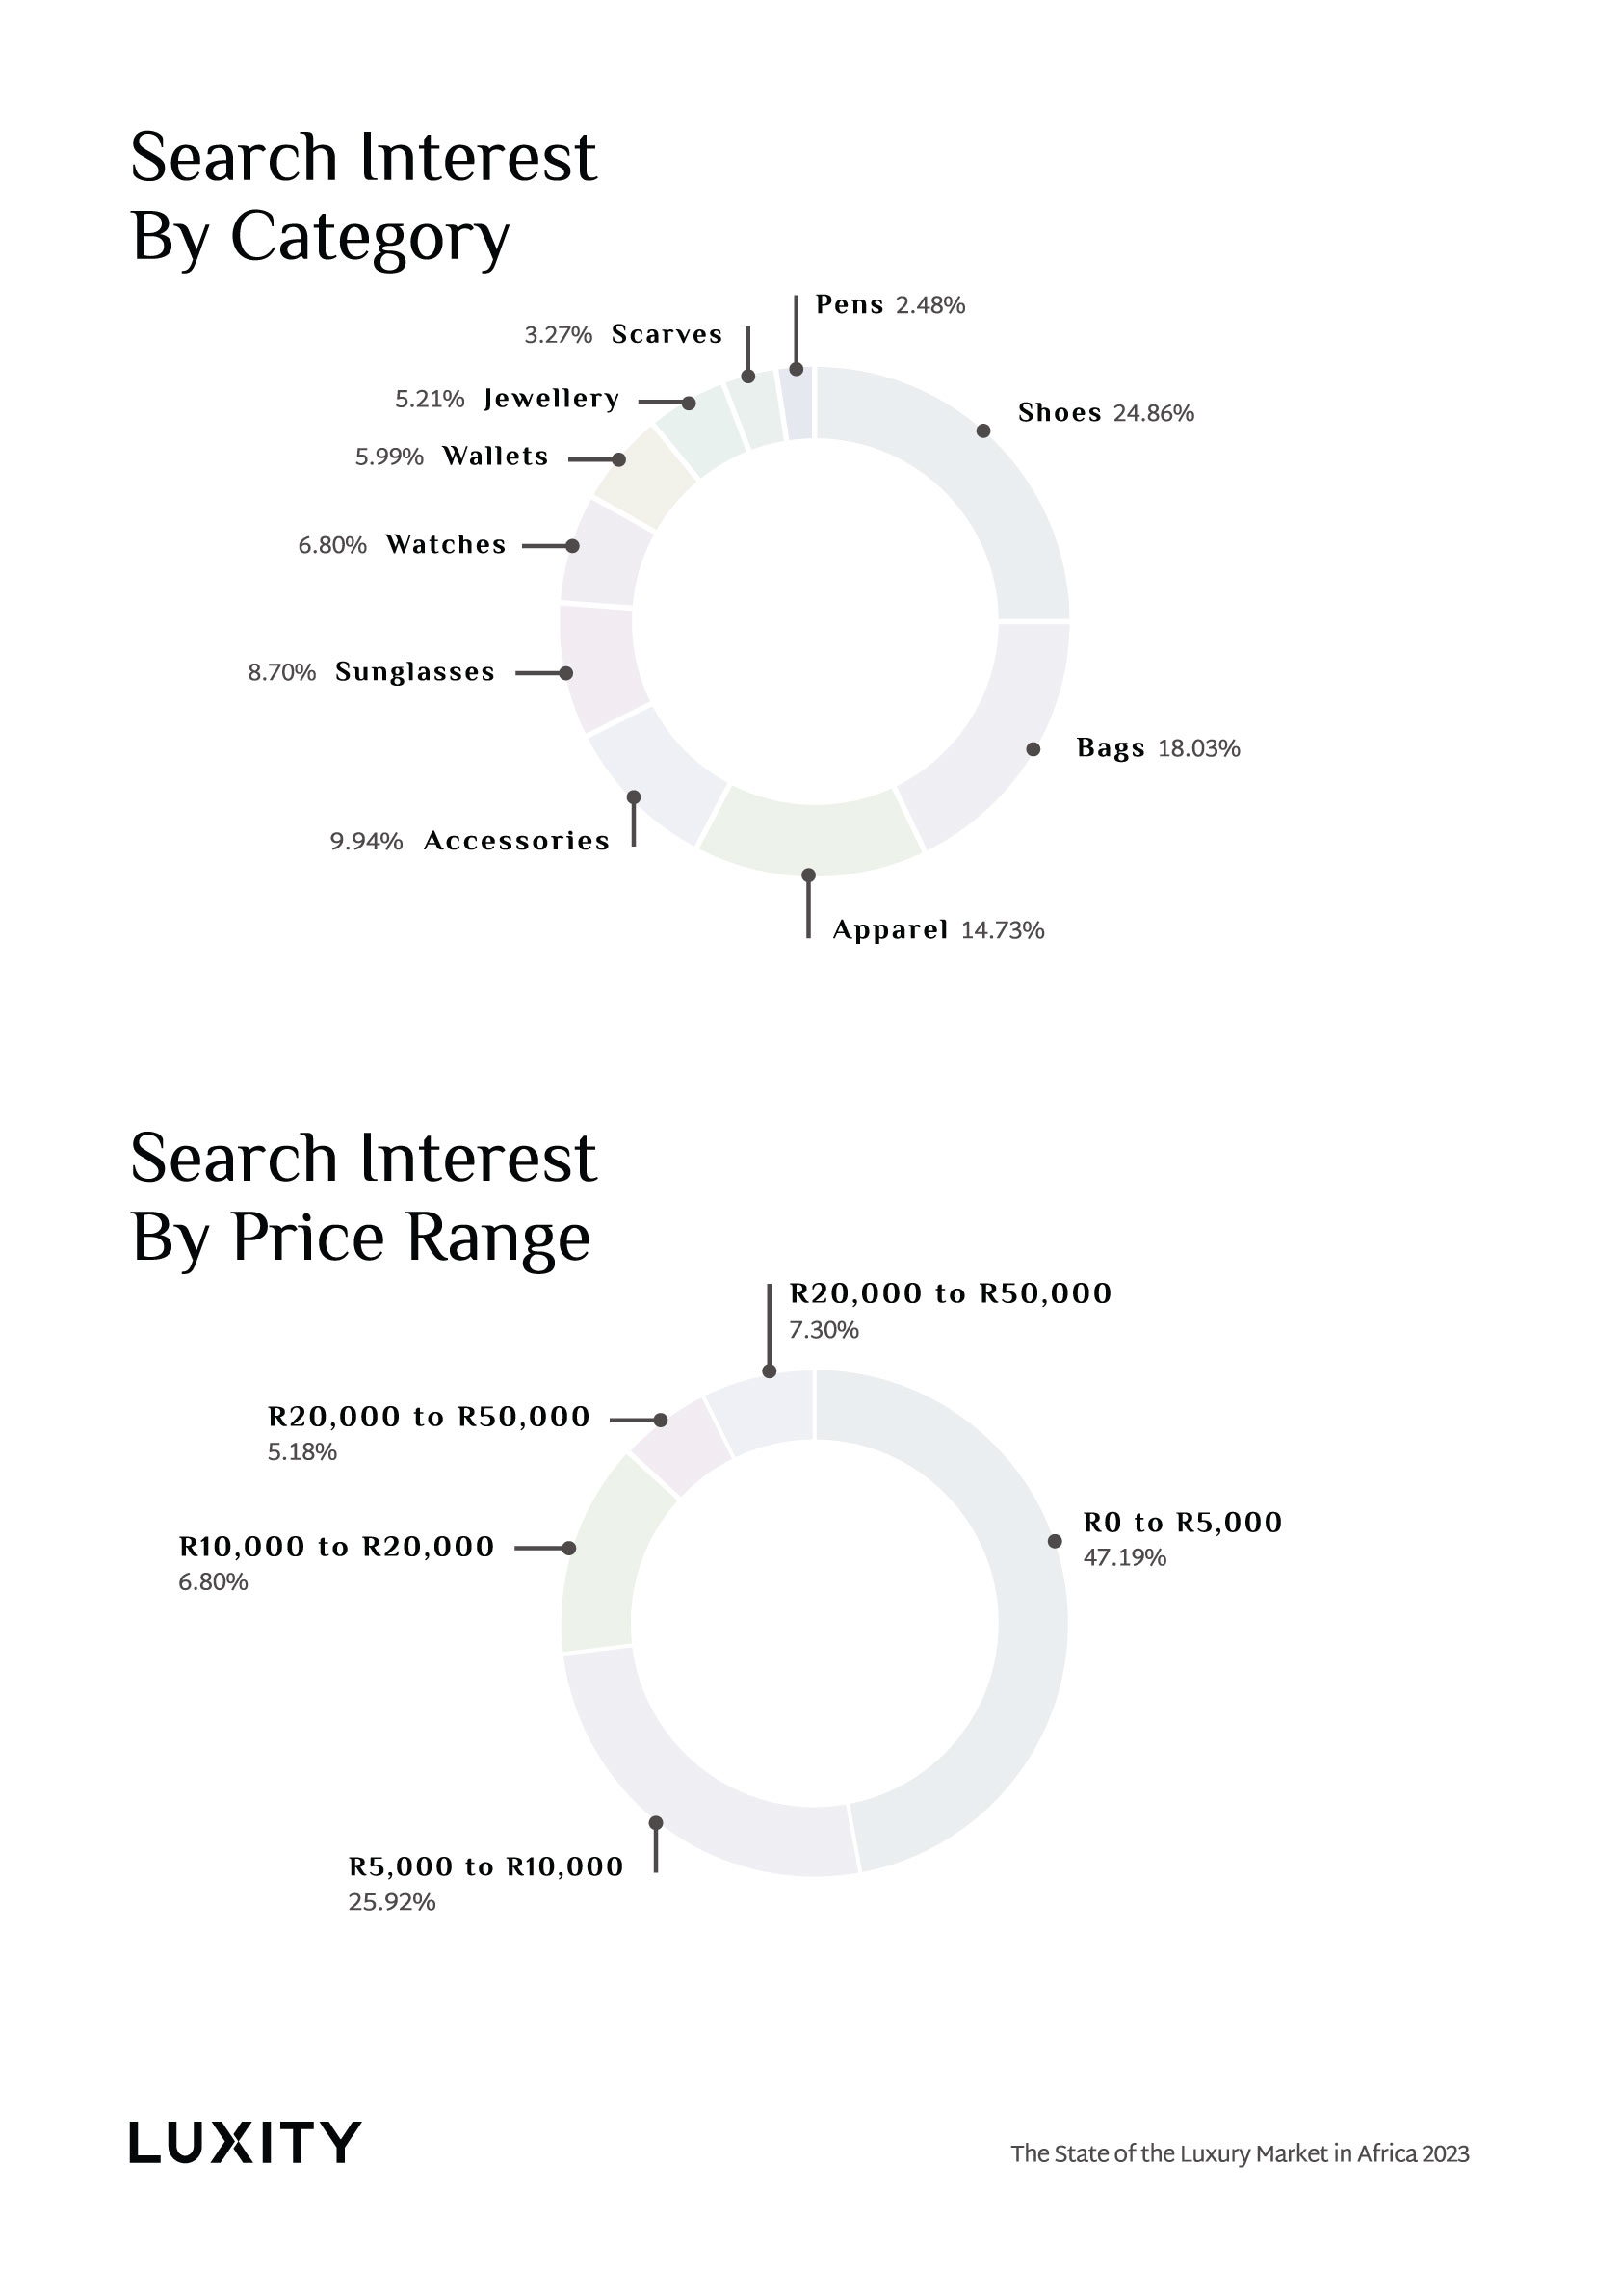 Search Interest by Category